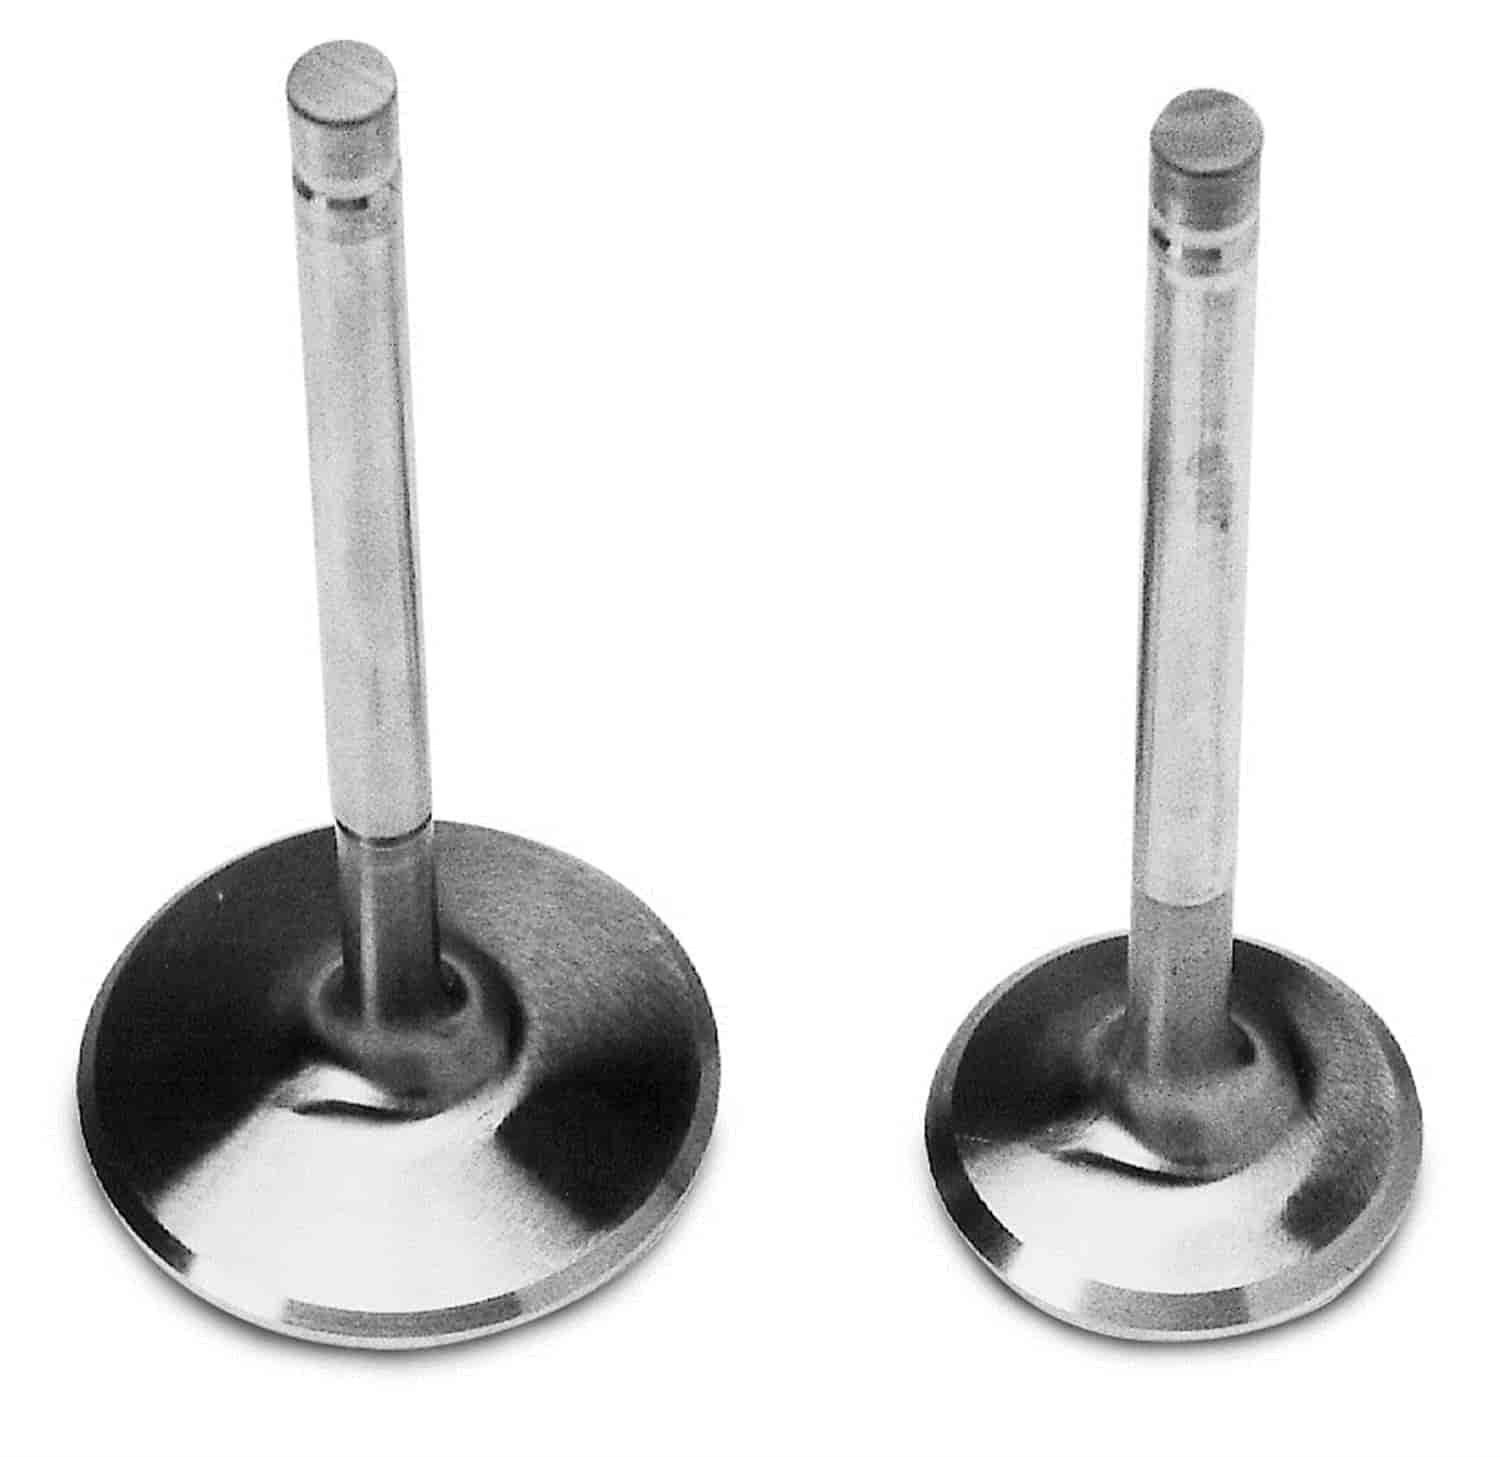 Exhaust Valve Set 1.60" for AMC, Small Block Chevy, & Small Block Ford